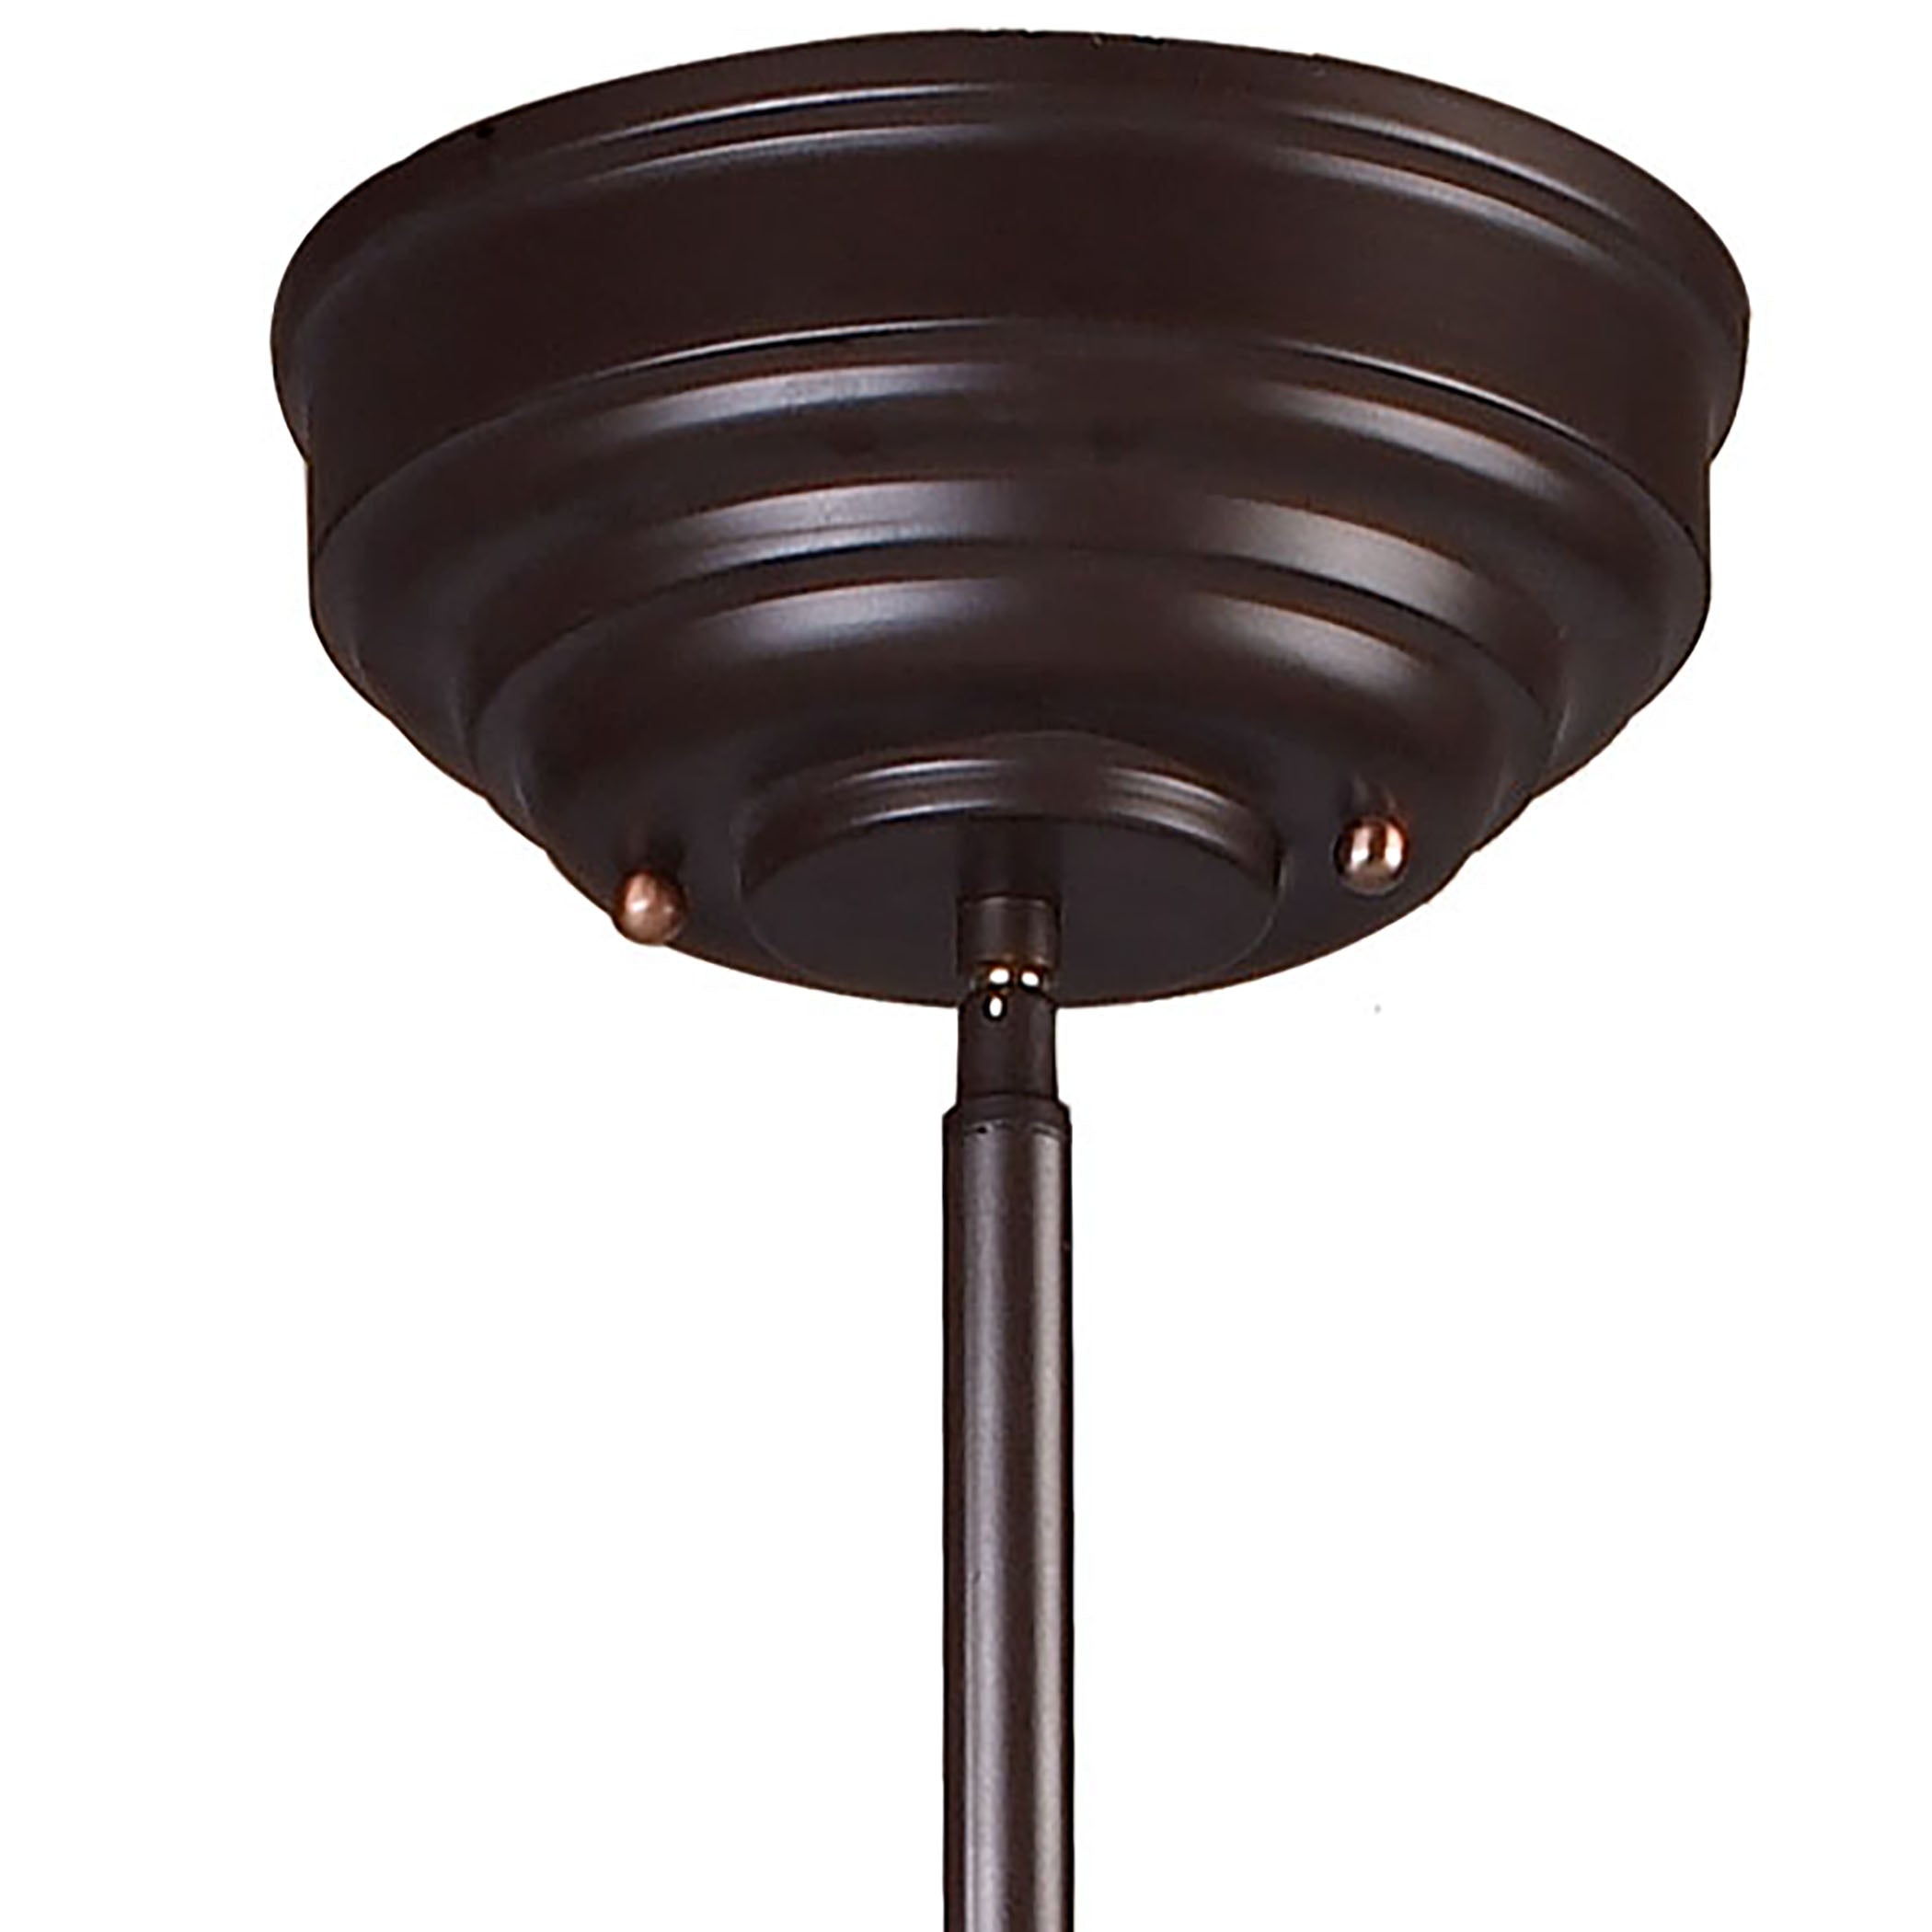 ELK Lighting 66135-3 Chadwick 3-Light Island Light in Oiled Bronze with Matching Shade